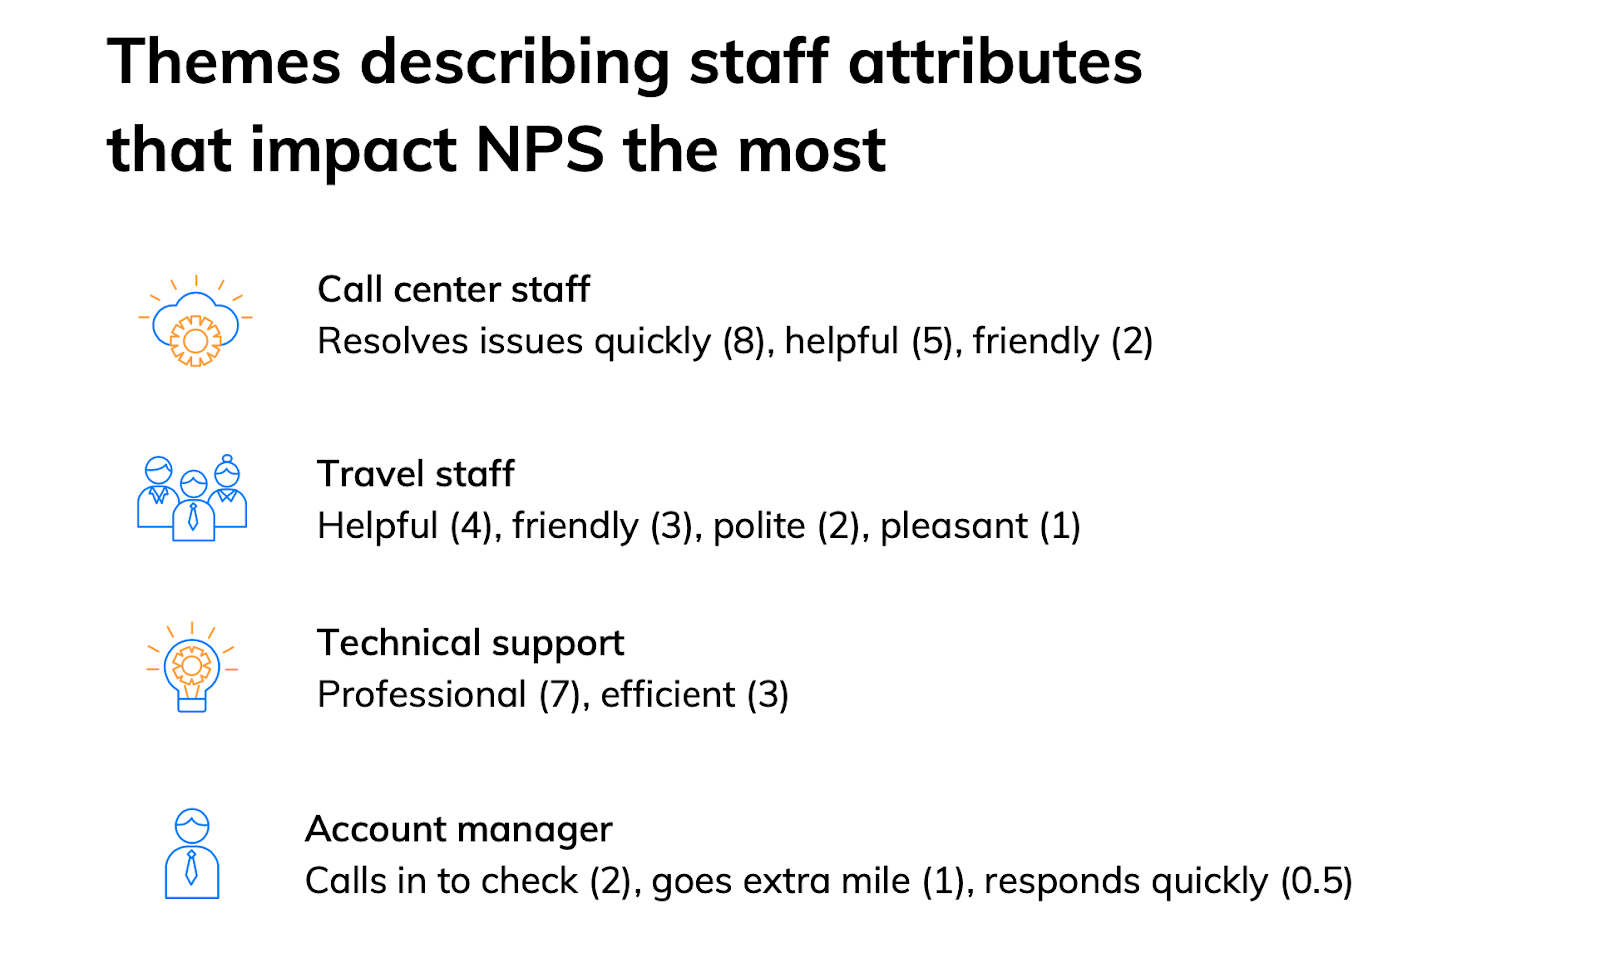 themes describing staff attributes that impact NPS the most